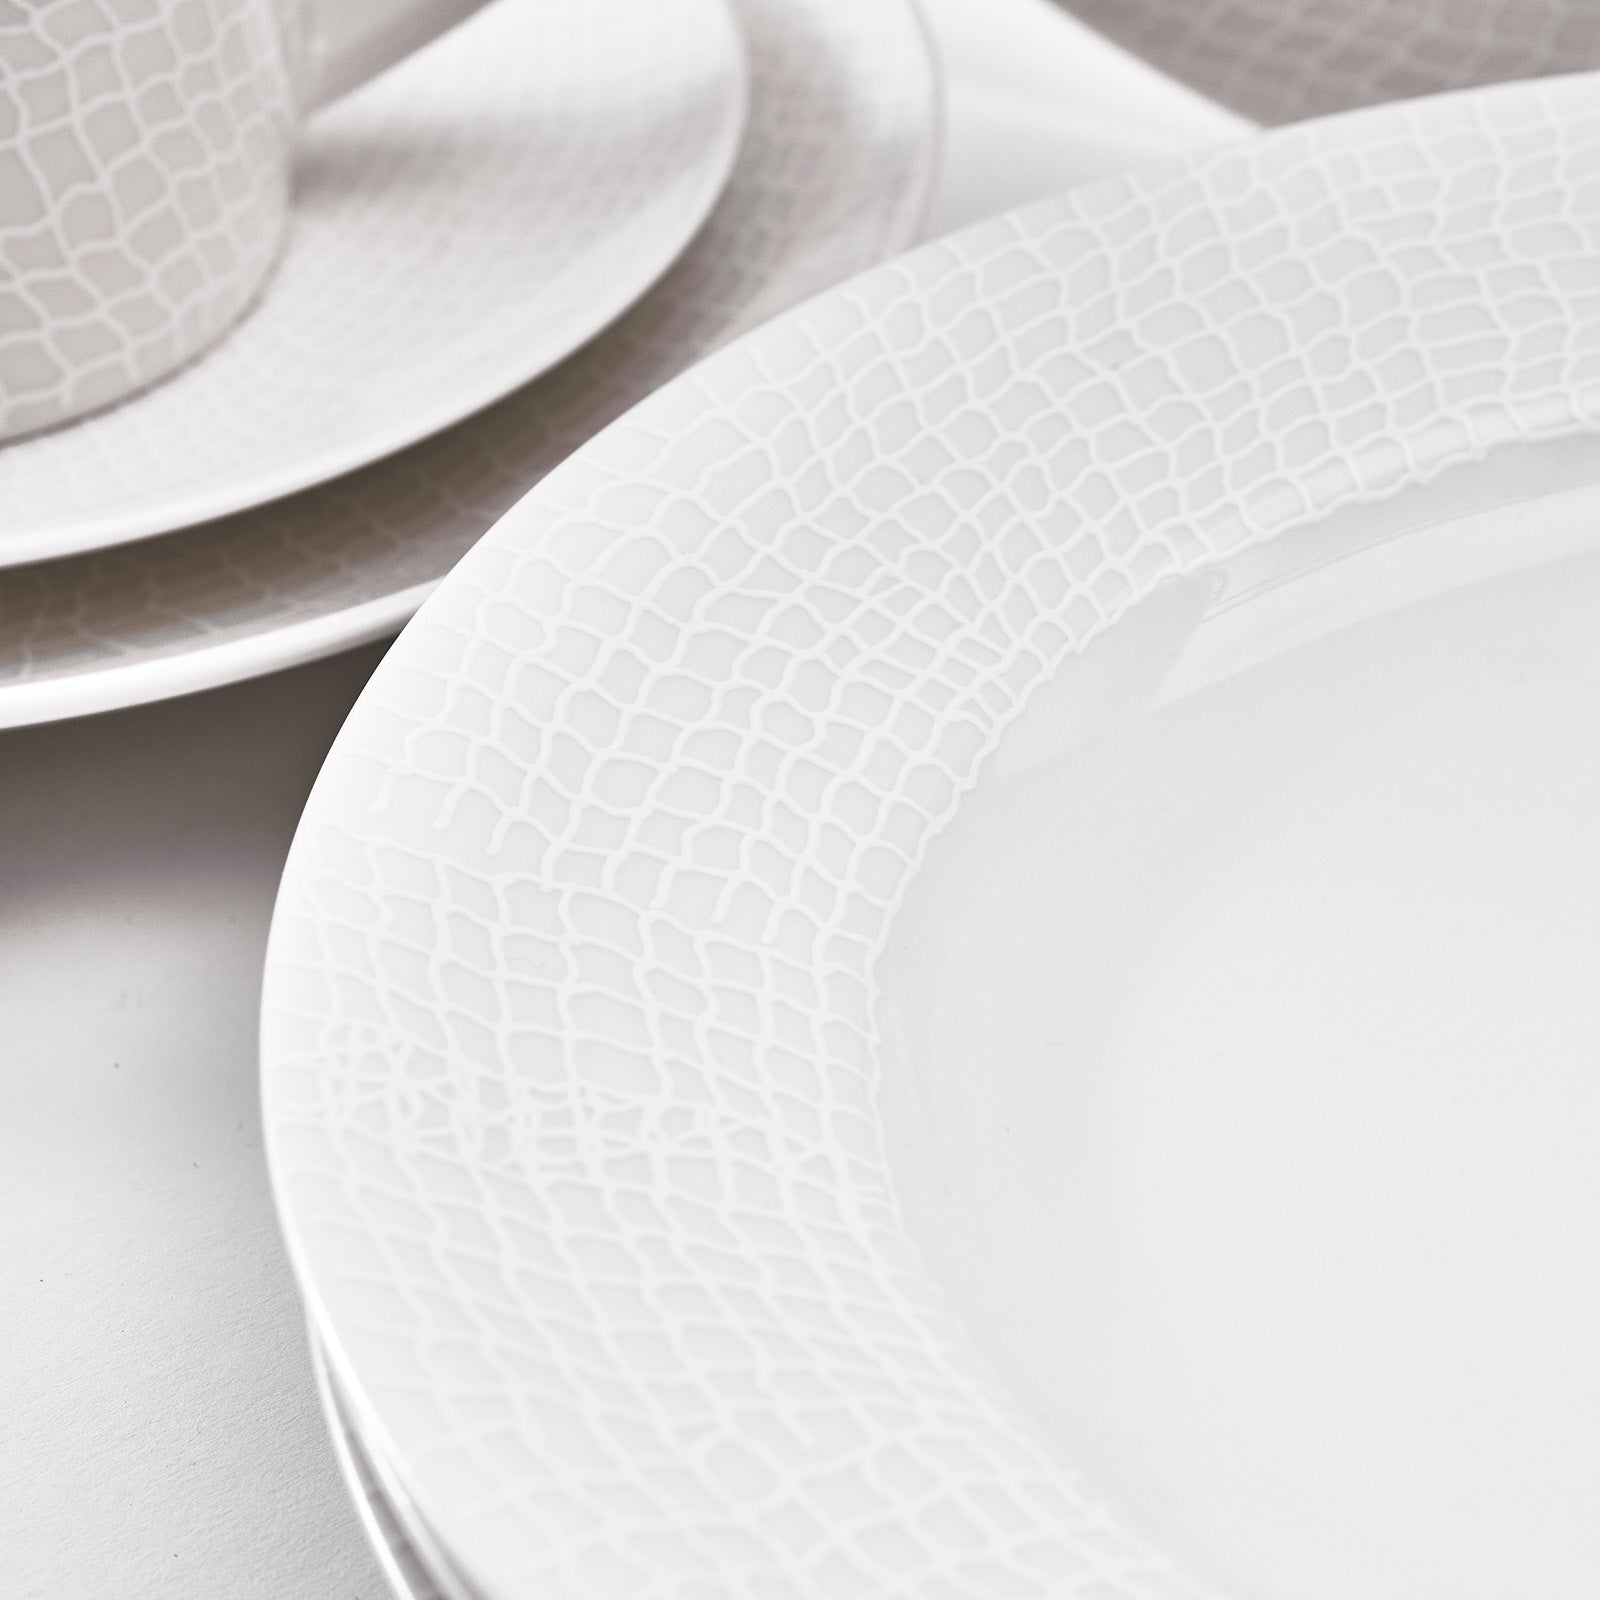 Catch white on white 16 piece porcelain dinnerware set with abstract net pattern from Caskata